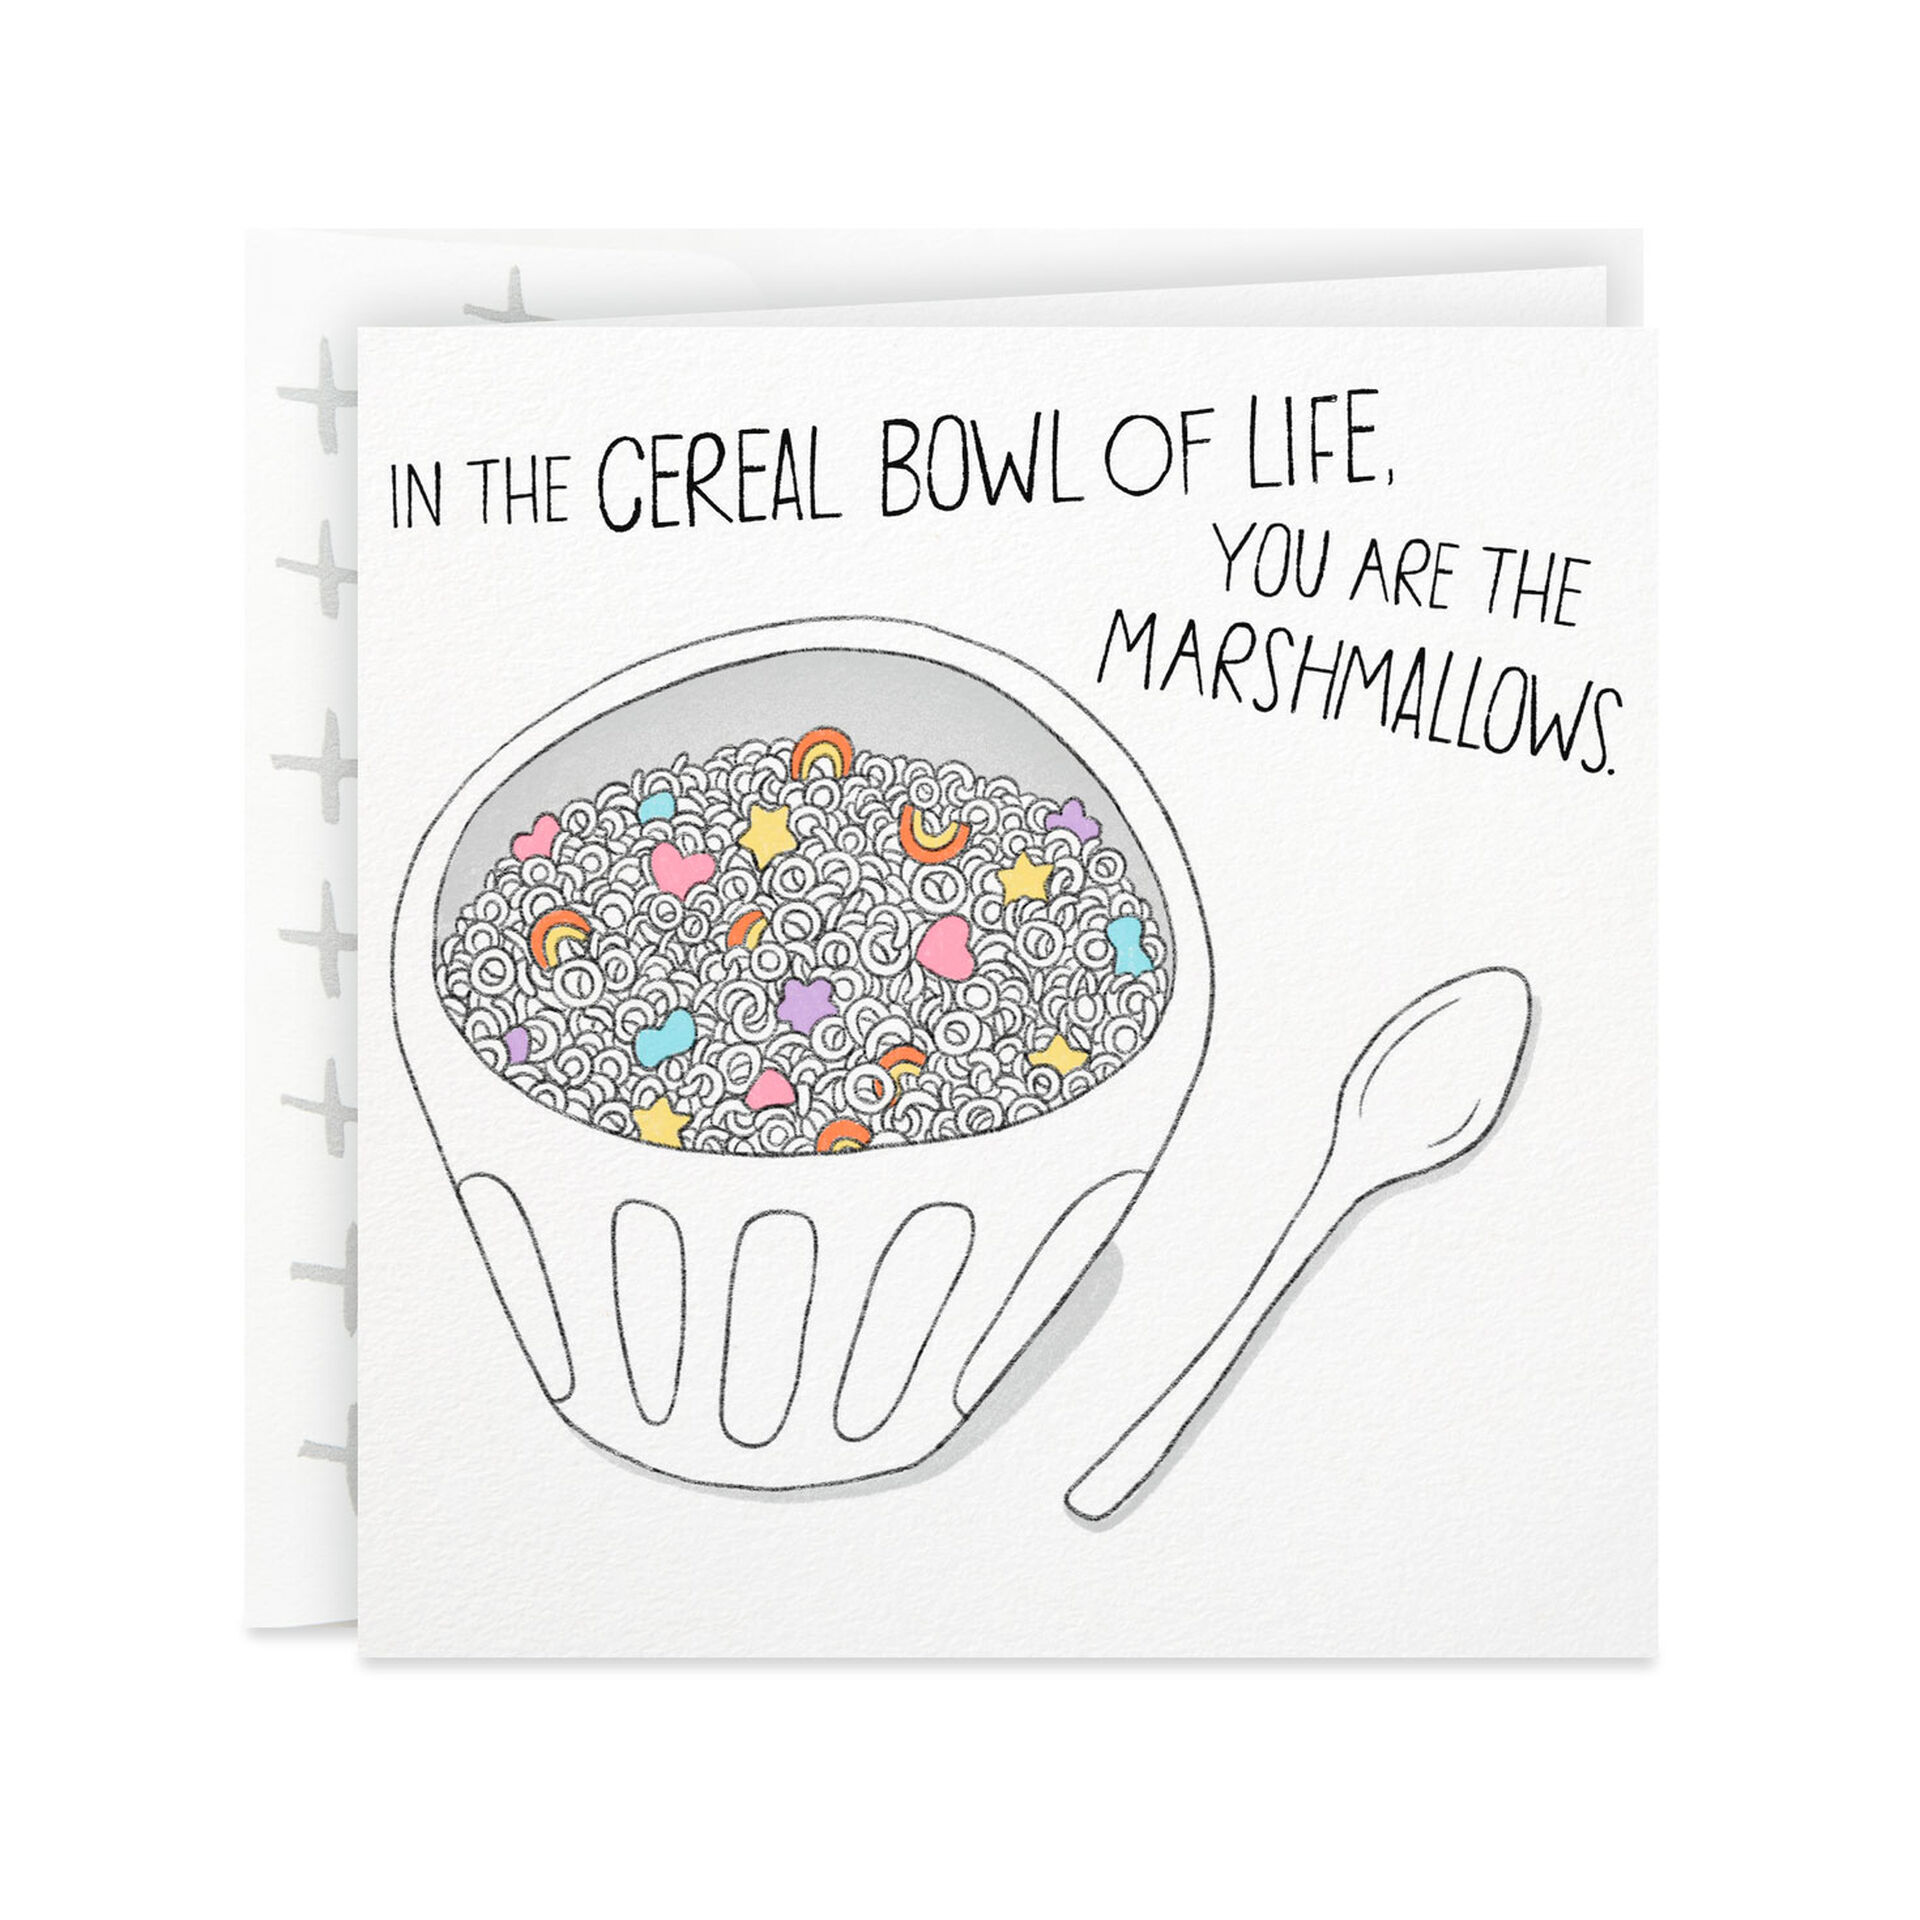 Cereal-Bowl-With-Marshmallows-Thinking-of-You-Card_299YYS1427_01